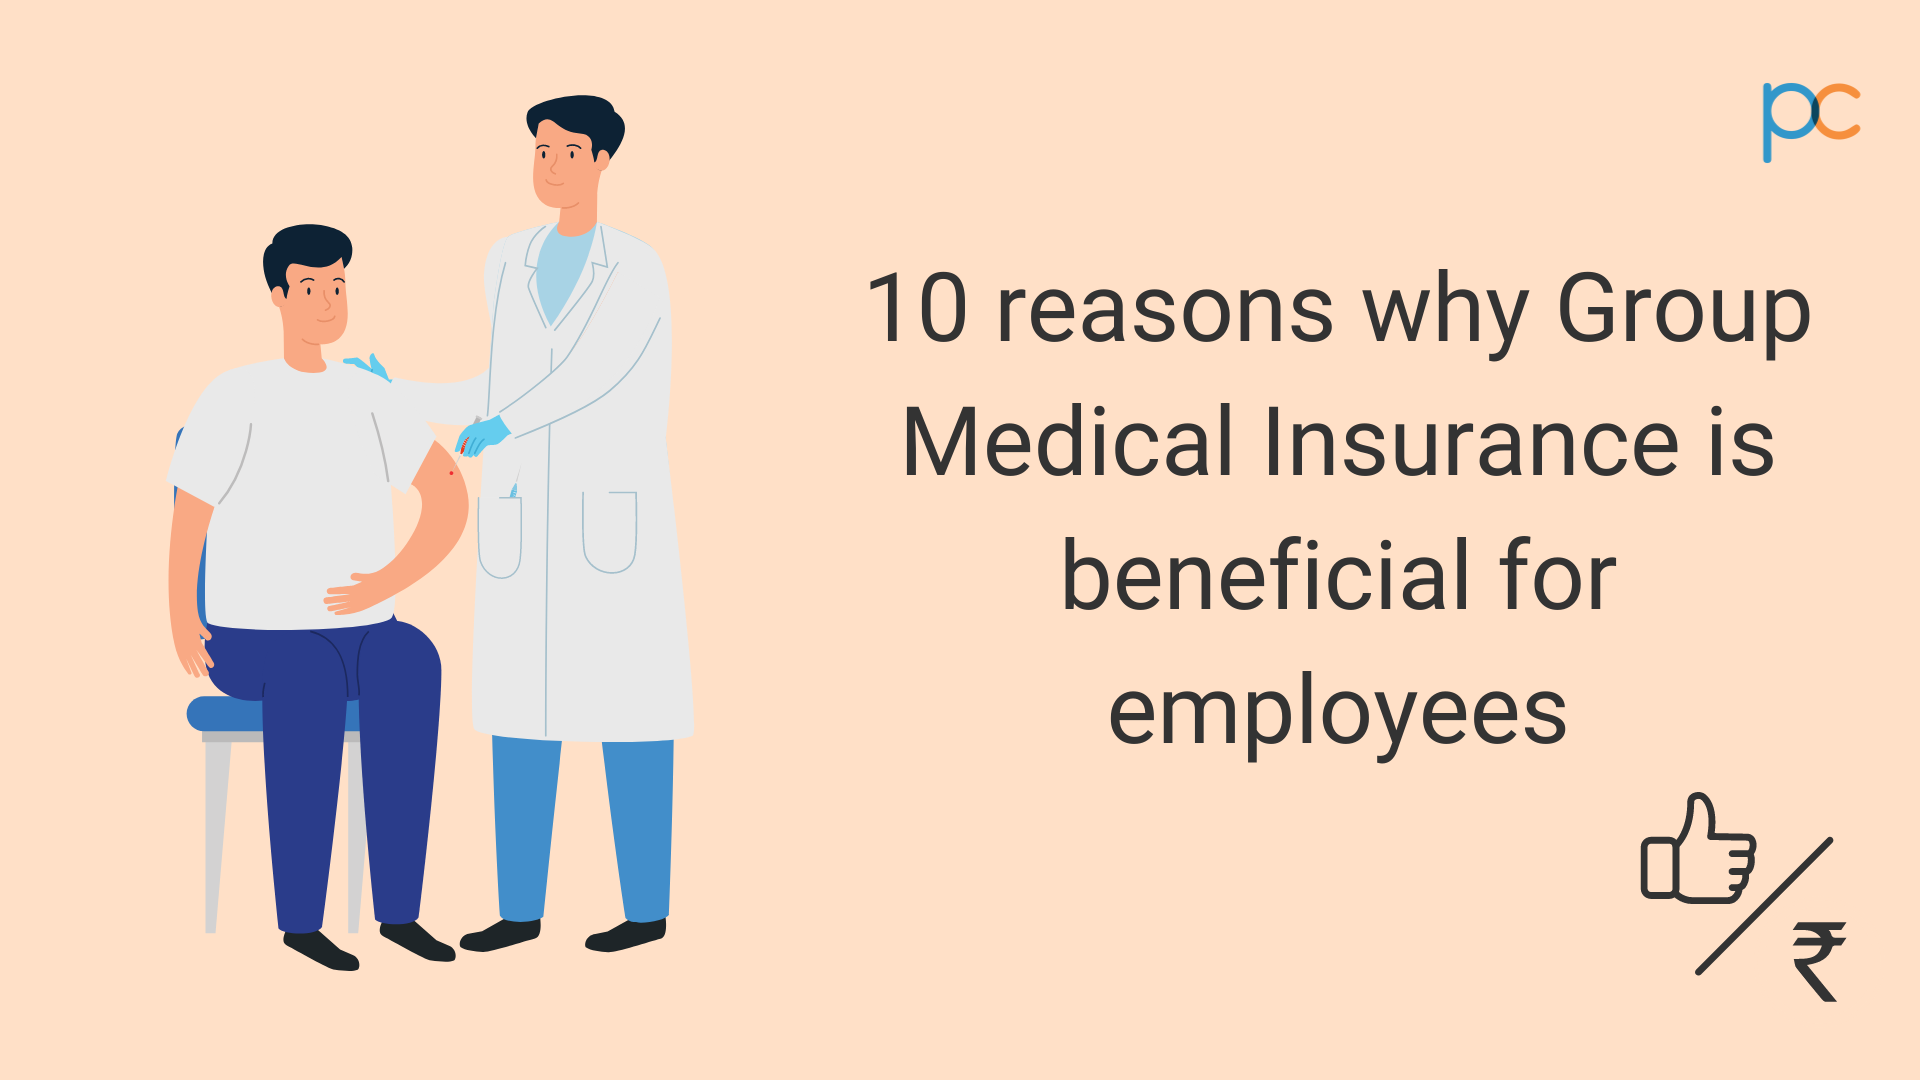 10 Reasons Why Group Medical Insurance is Beneficial for Employees 1